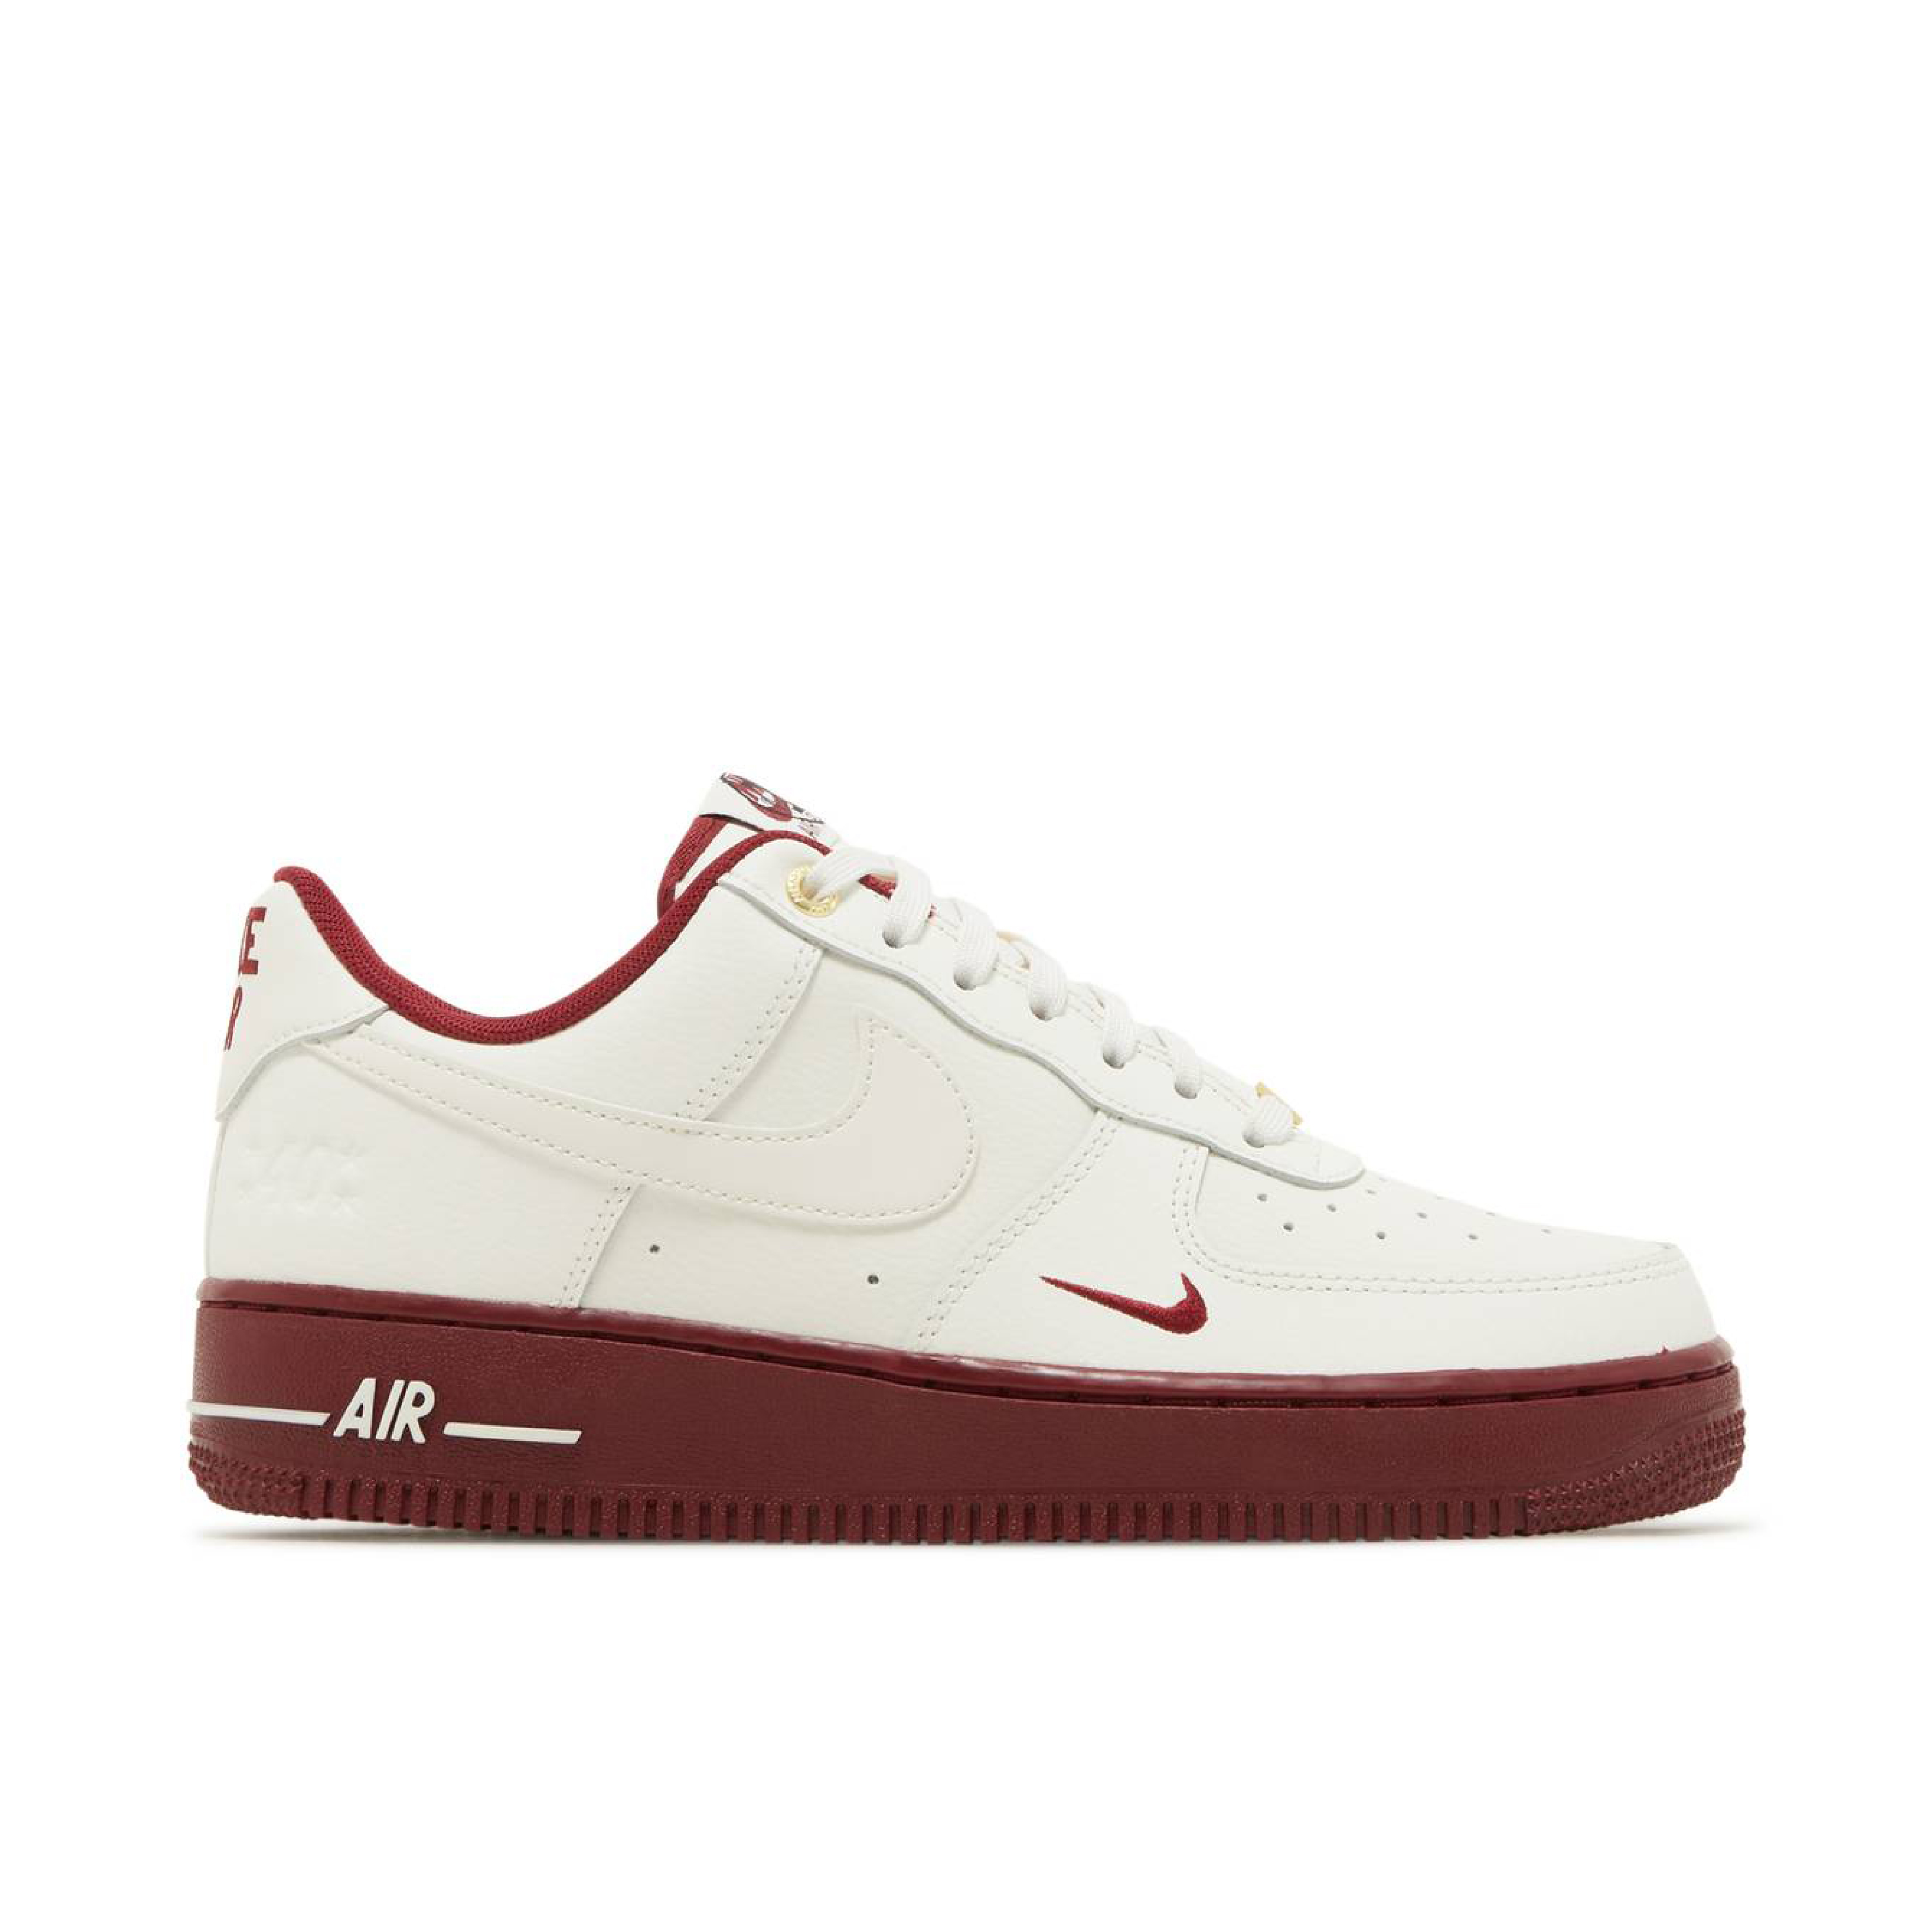 Red Air Force 1 Trainers, Online Nike Sneakers